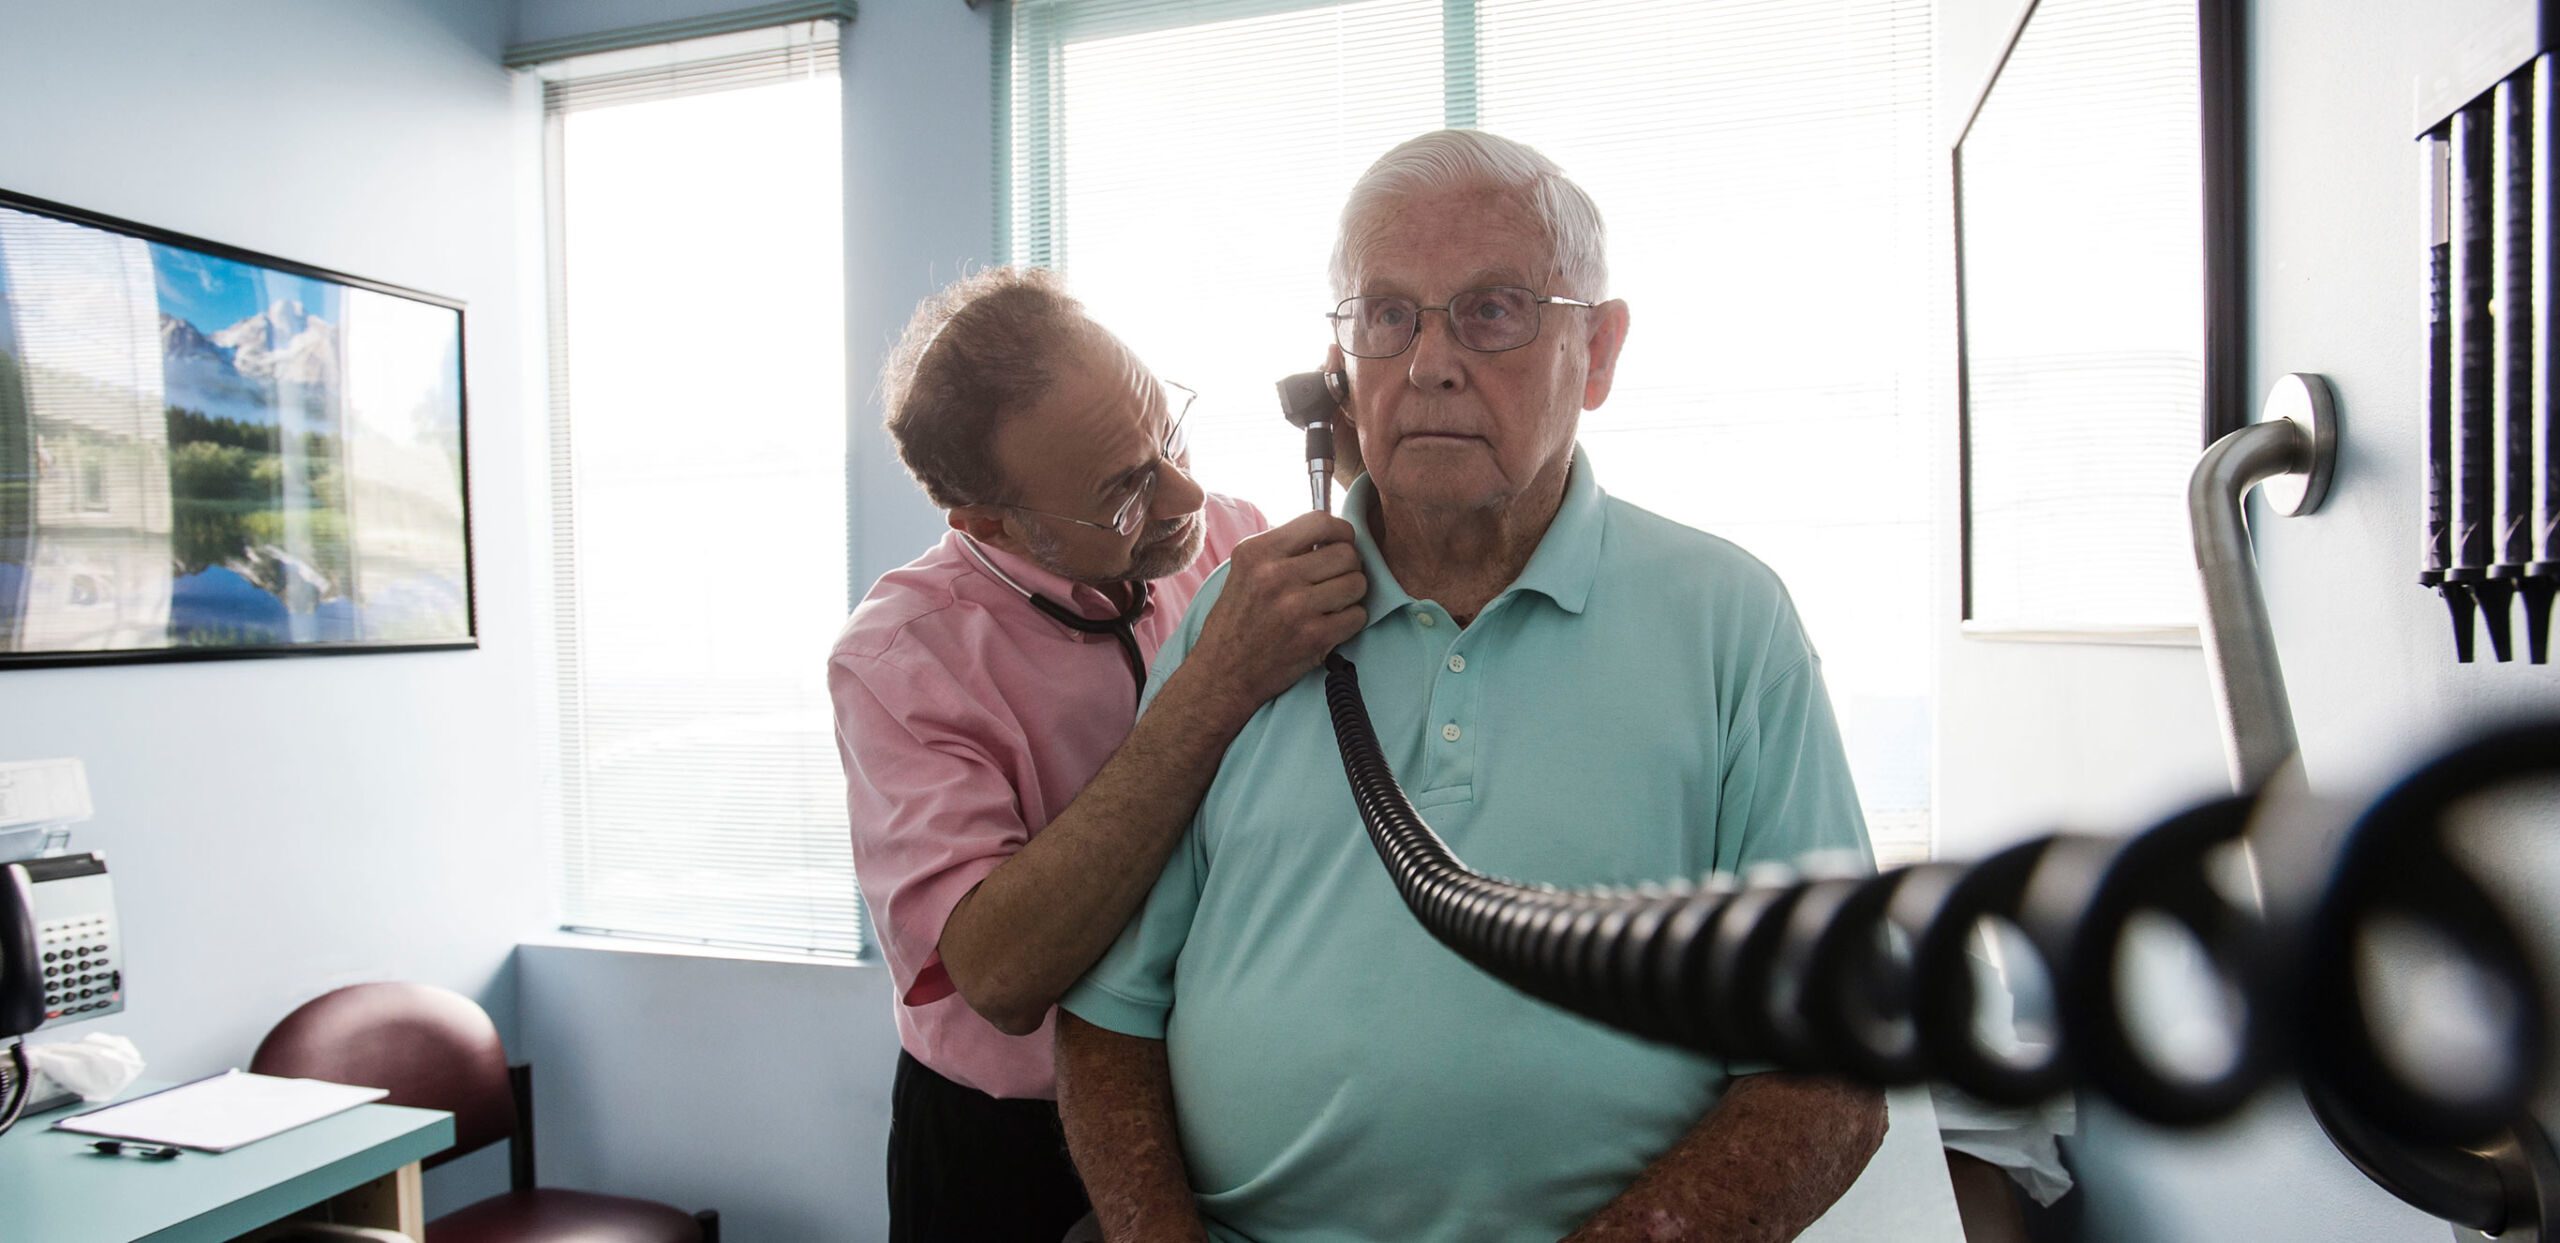 Internist David Alpern, MD. uses an otoscope to check the ear of a male patient at Conz Street Internal Medicine, Northampton, MA 01060.